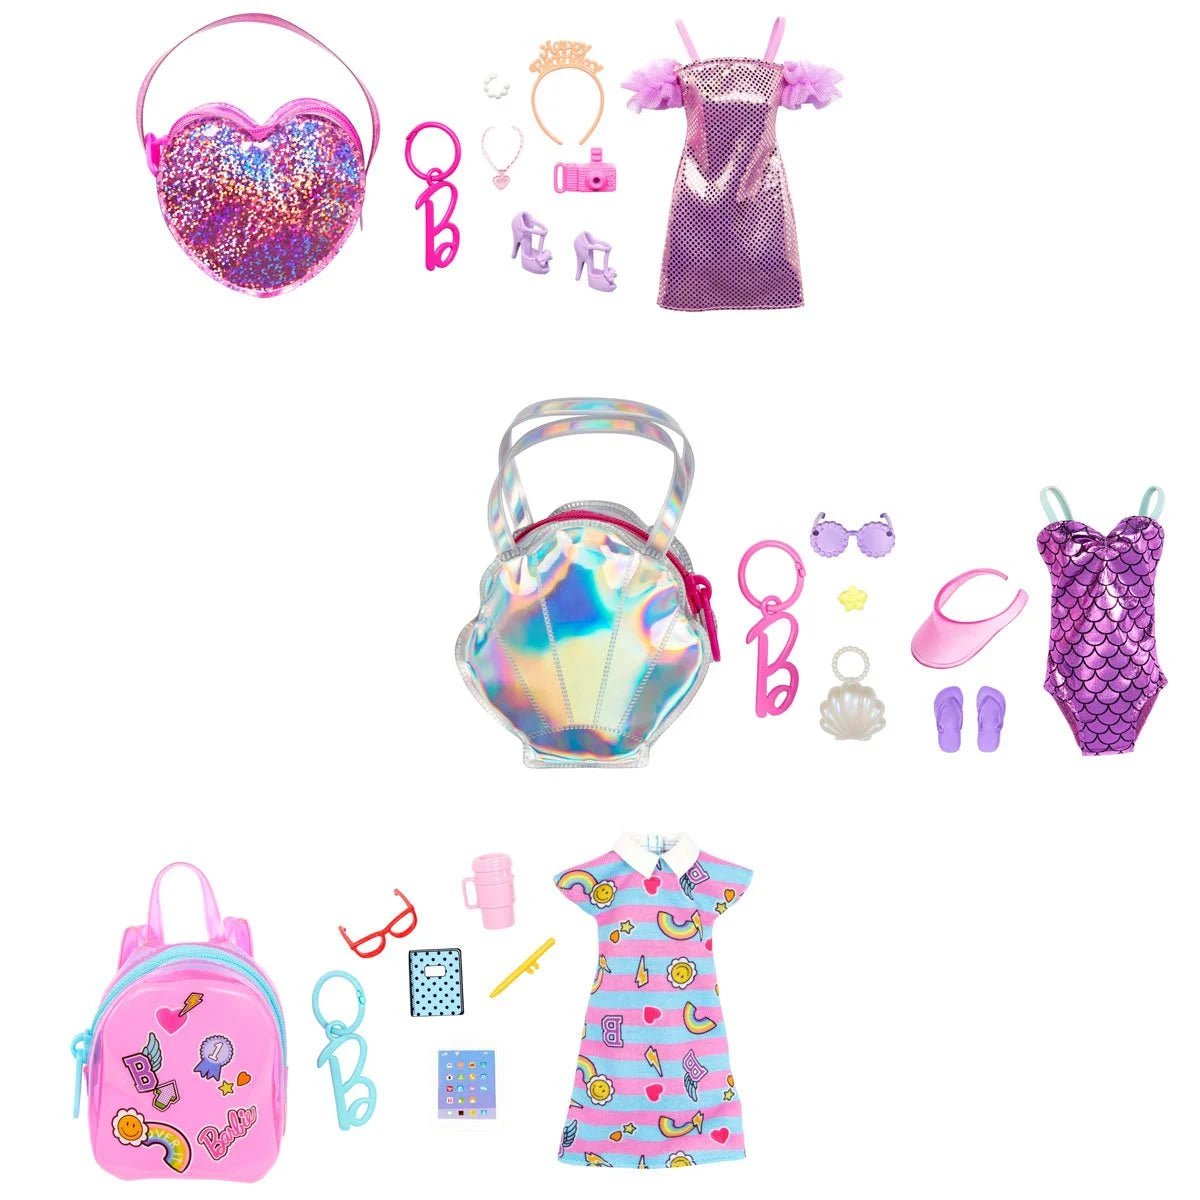 Barbie Premium Fashion Pack: Outfit, Accessories, and a Voluminous Bag - Choose Birthday, Beach or School - Simon's Collectibles